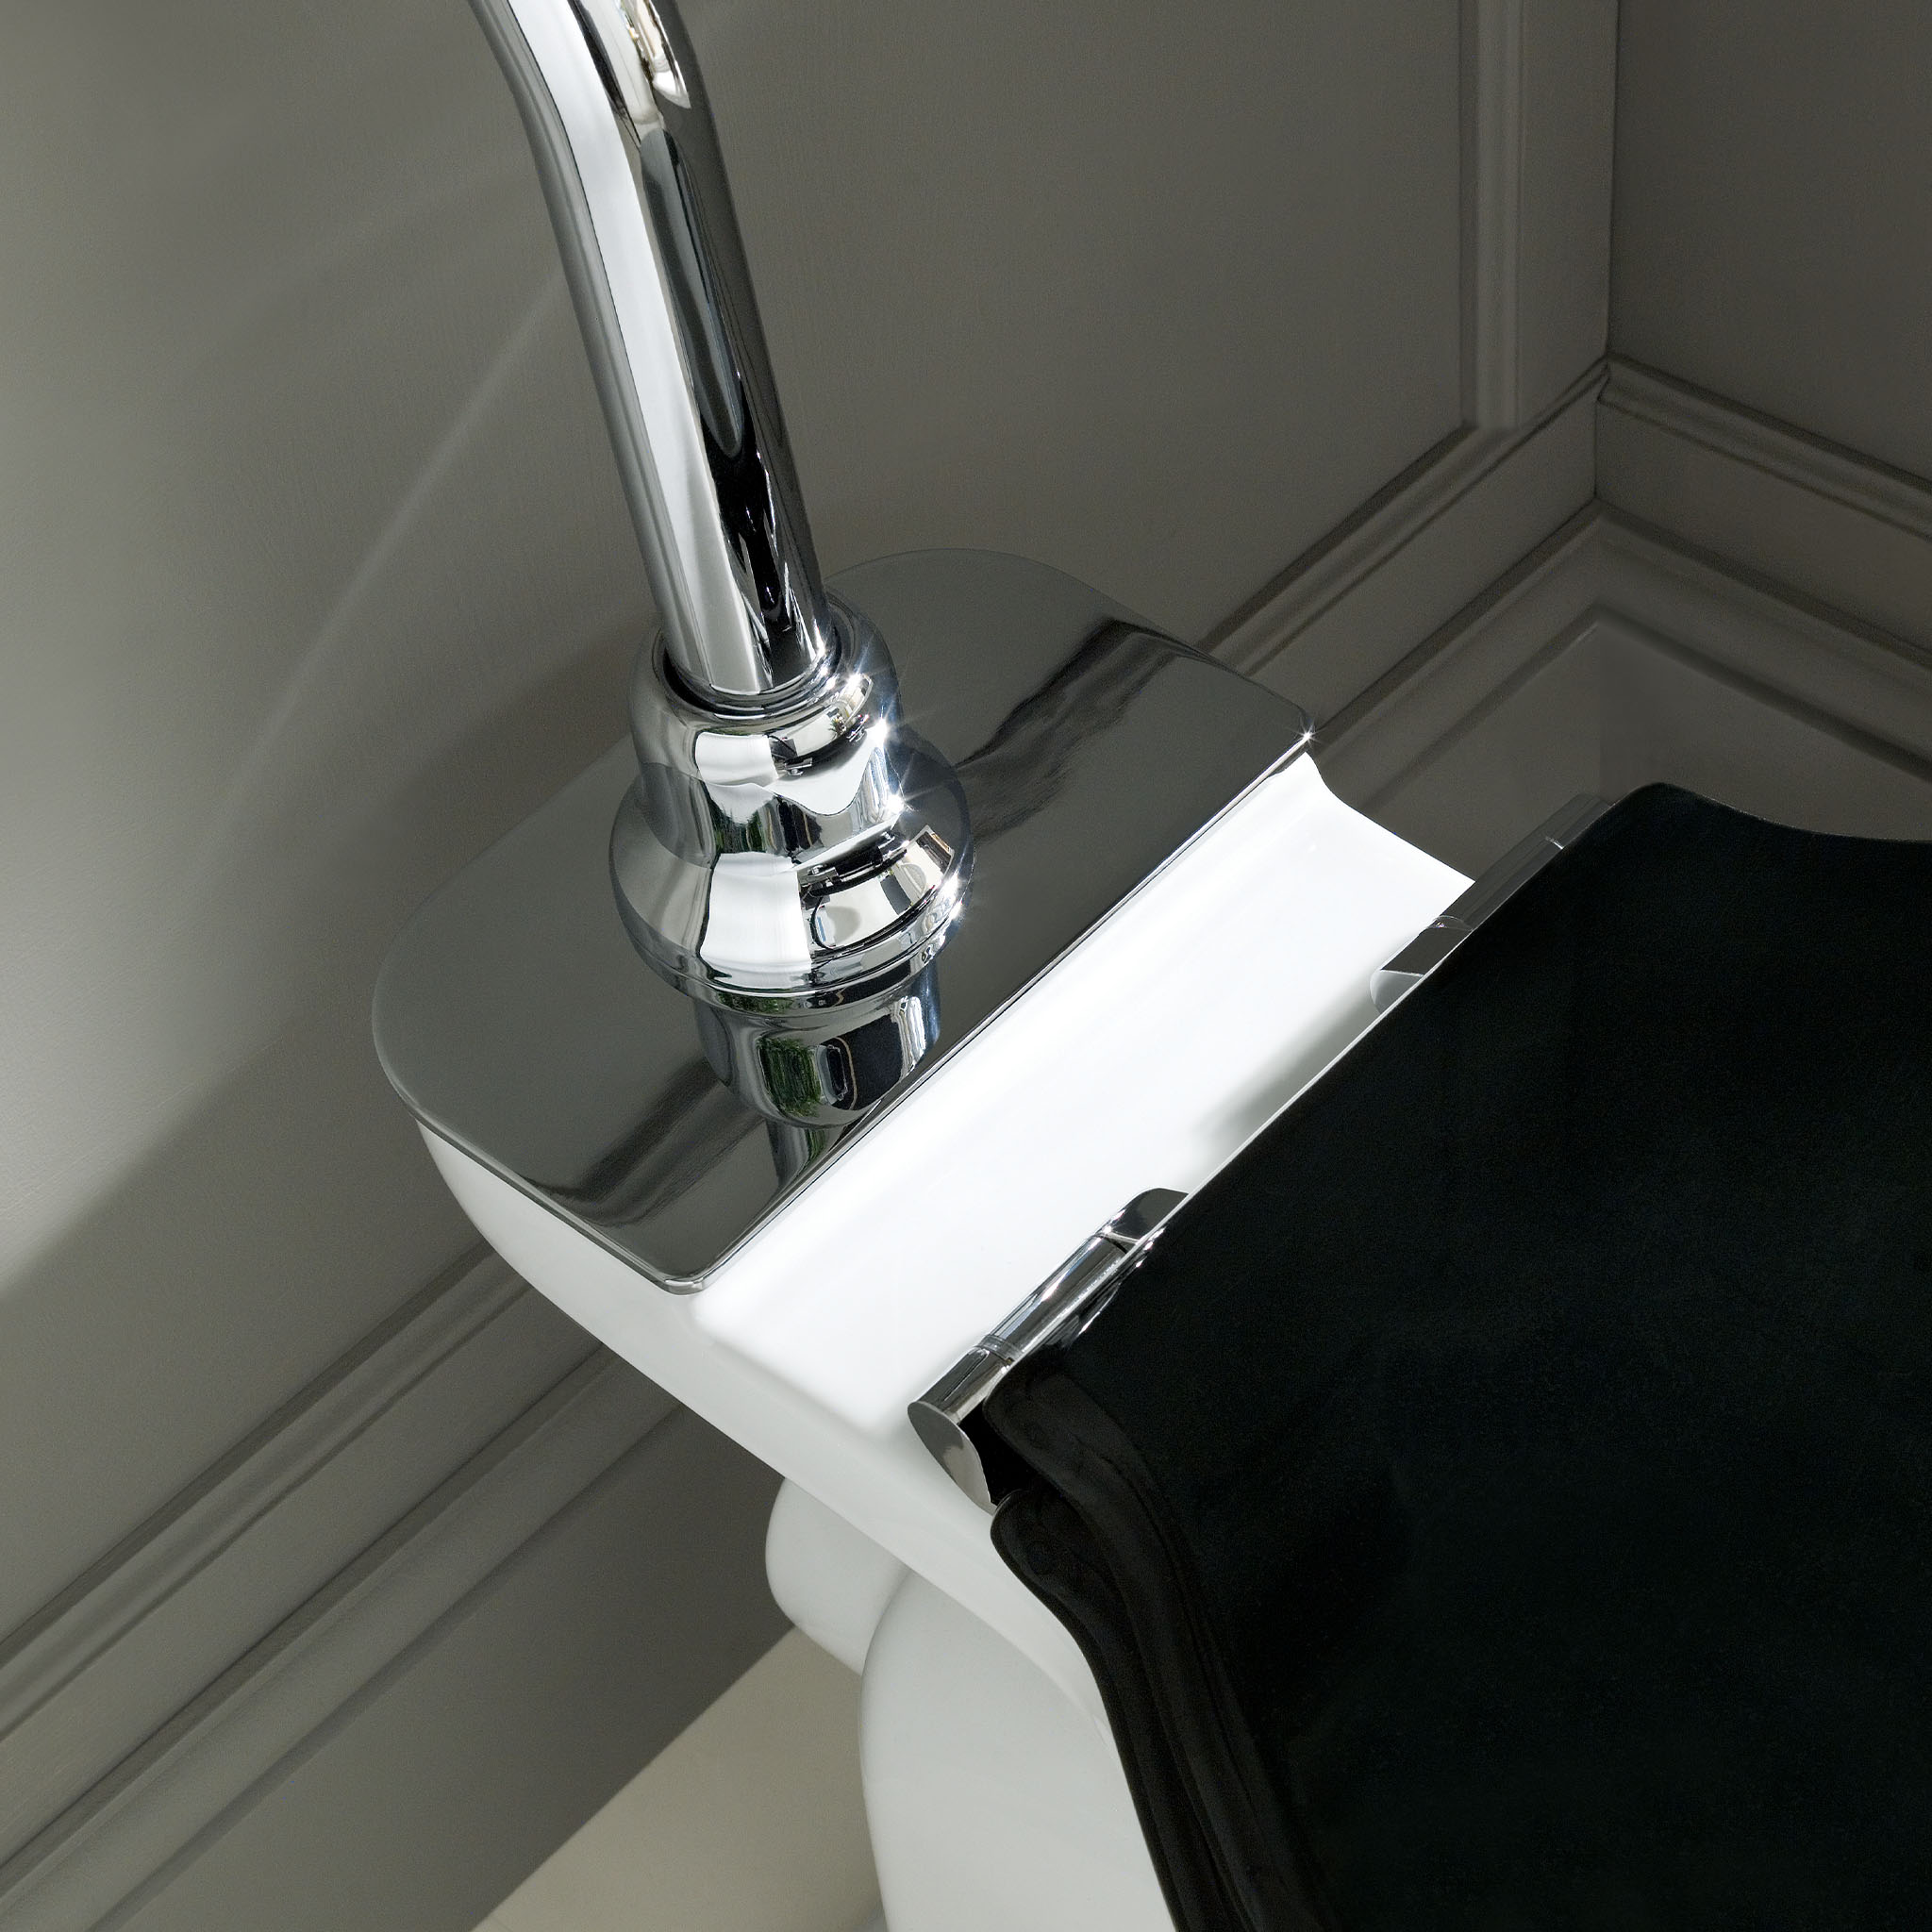 Bayswater Victrion Low Level Pan & Cistern (Without Seat)